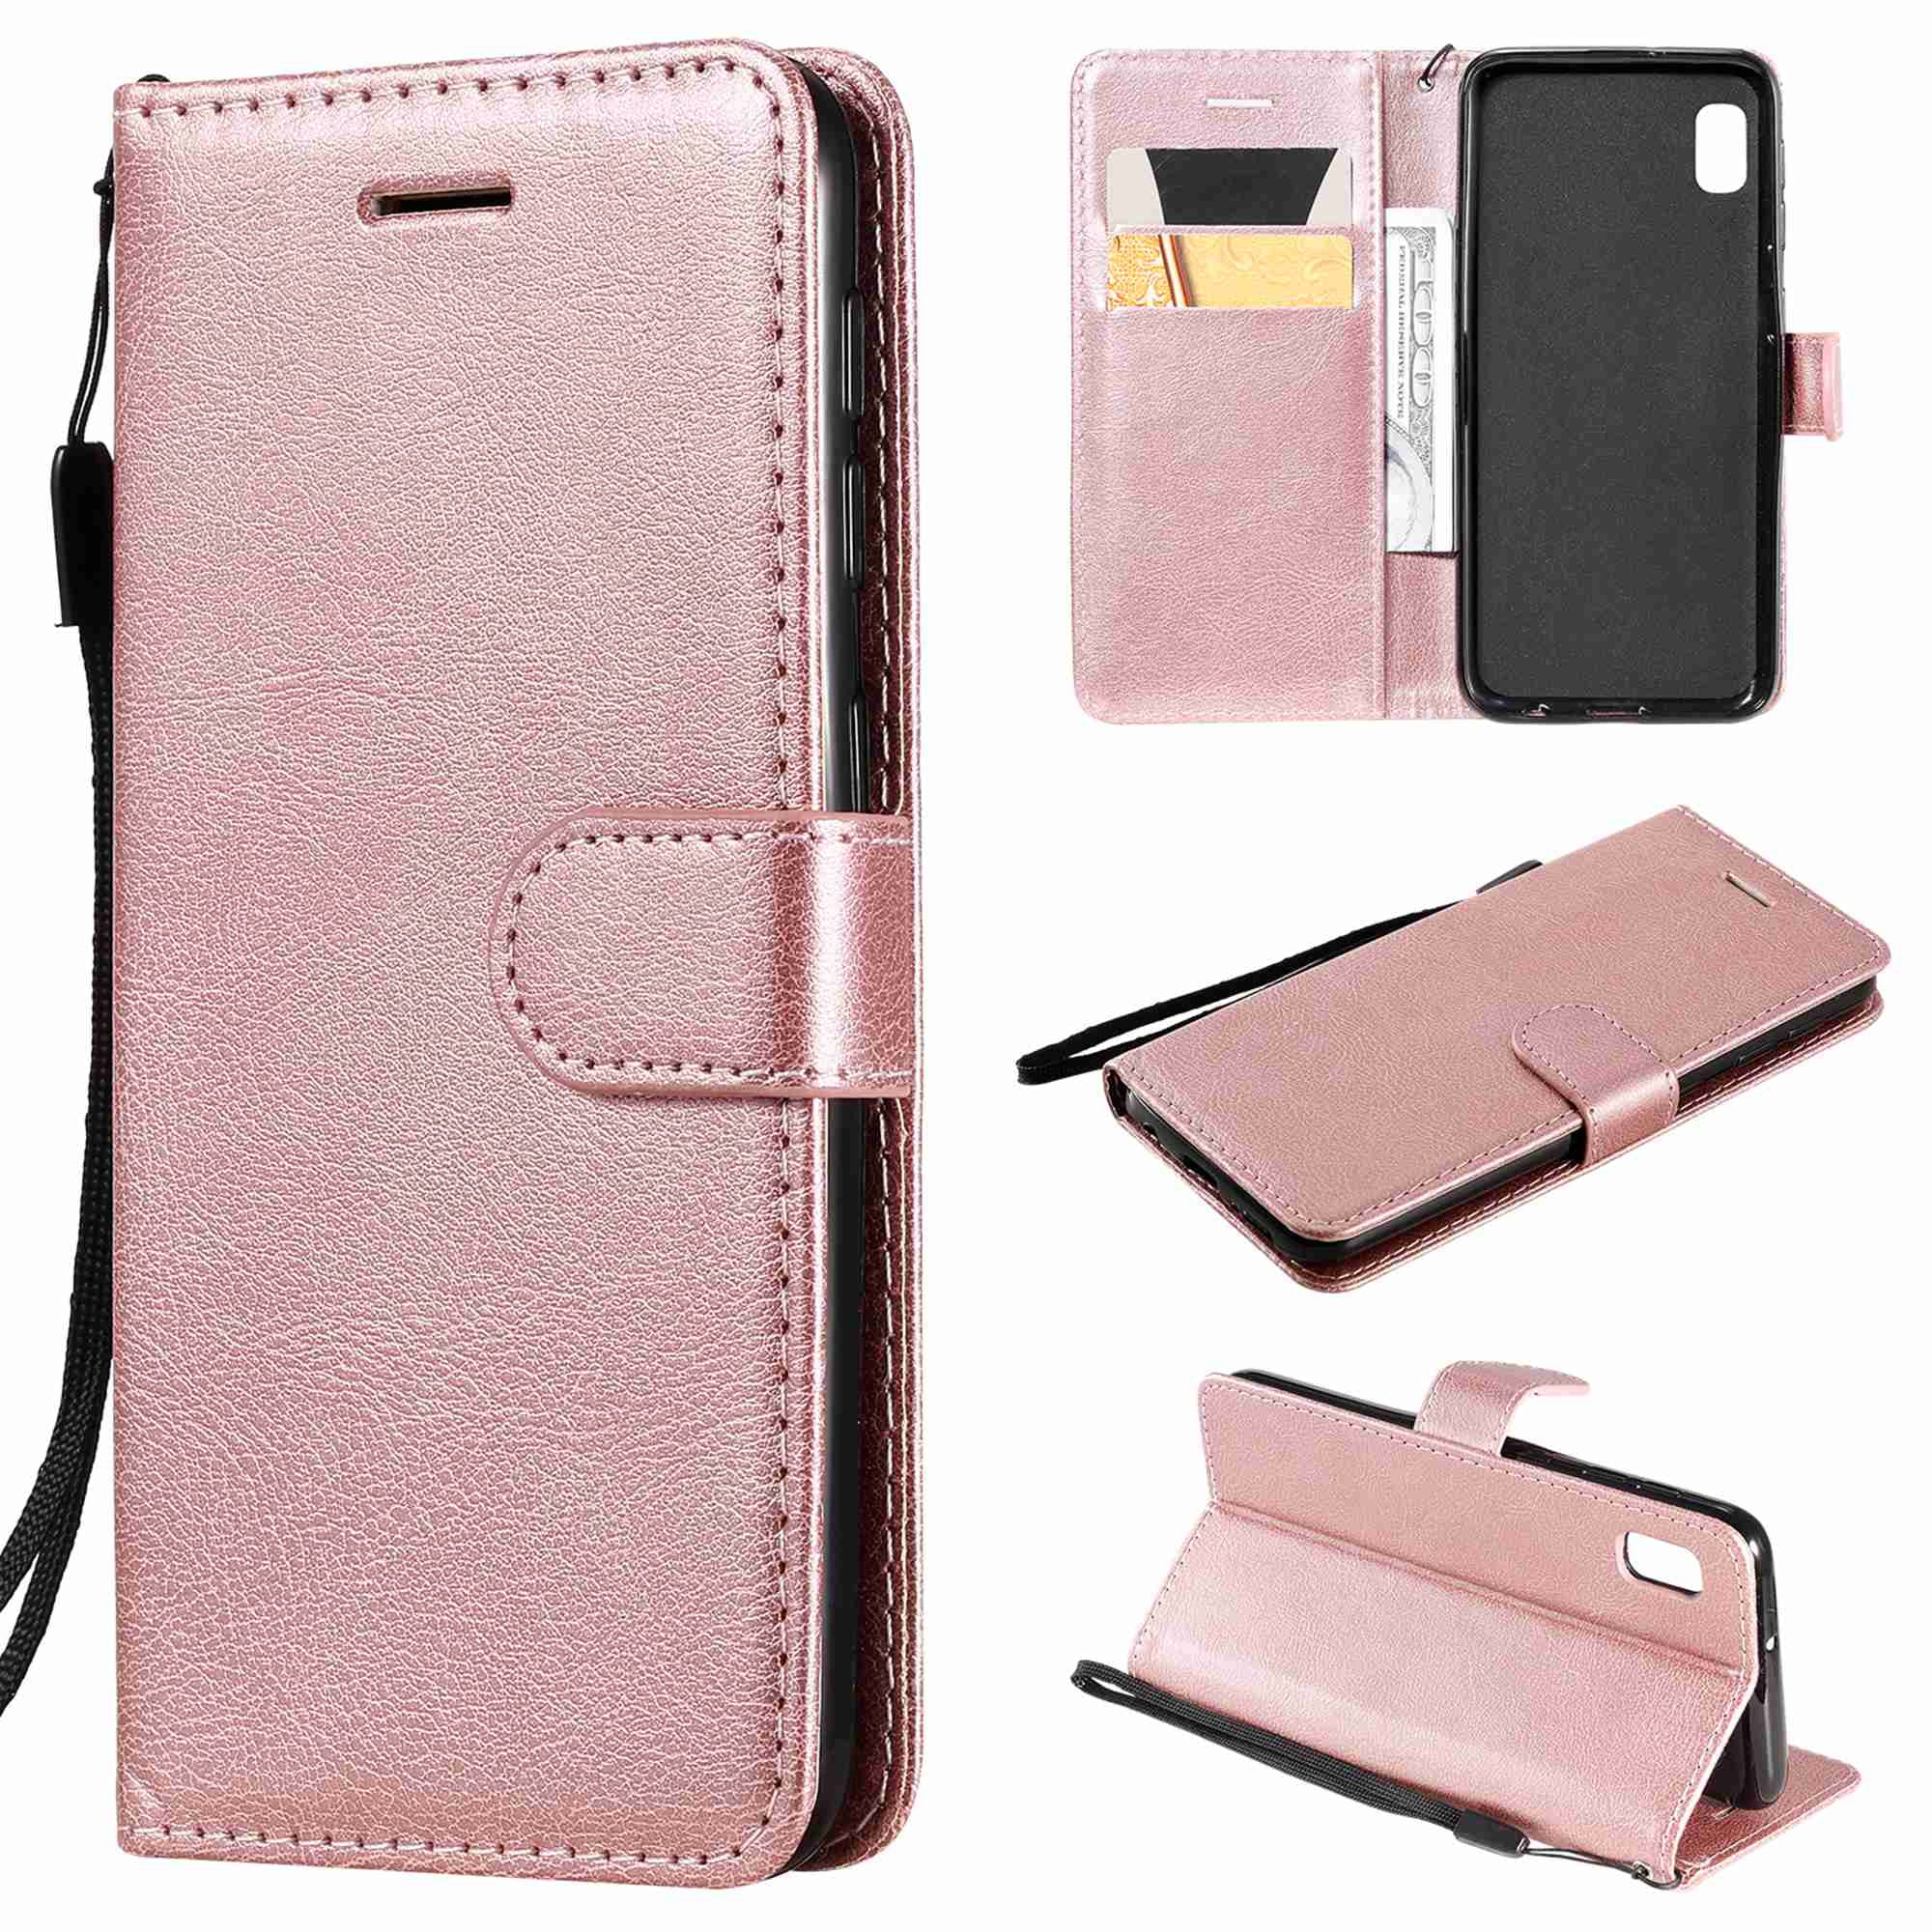 Amaze!uk Leather Phone Case Cover For Samsung Galaxy A10 Flip Protective Wallet Style Open Book Magnetic Stand Samsung A10 Black M10 6.2 Phone Case